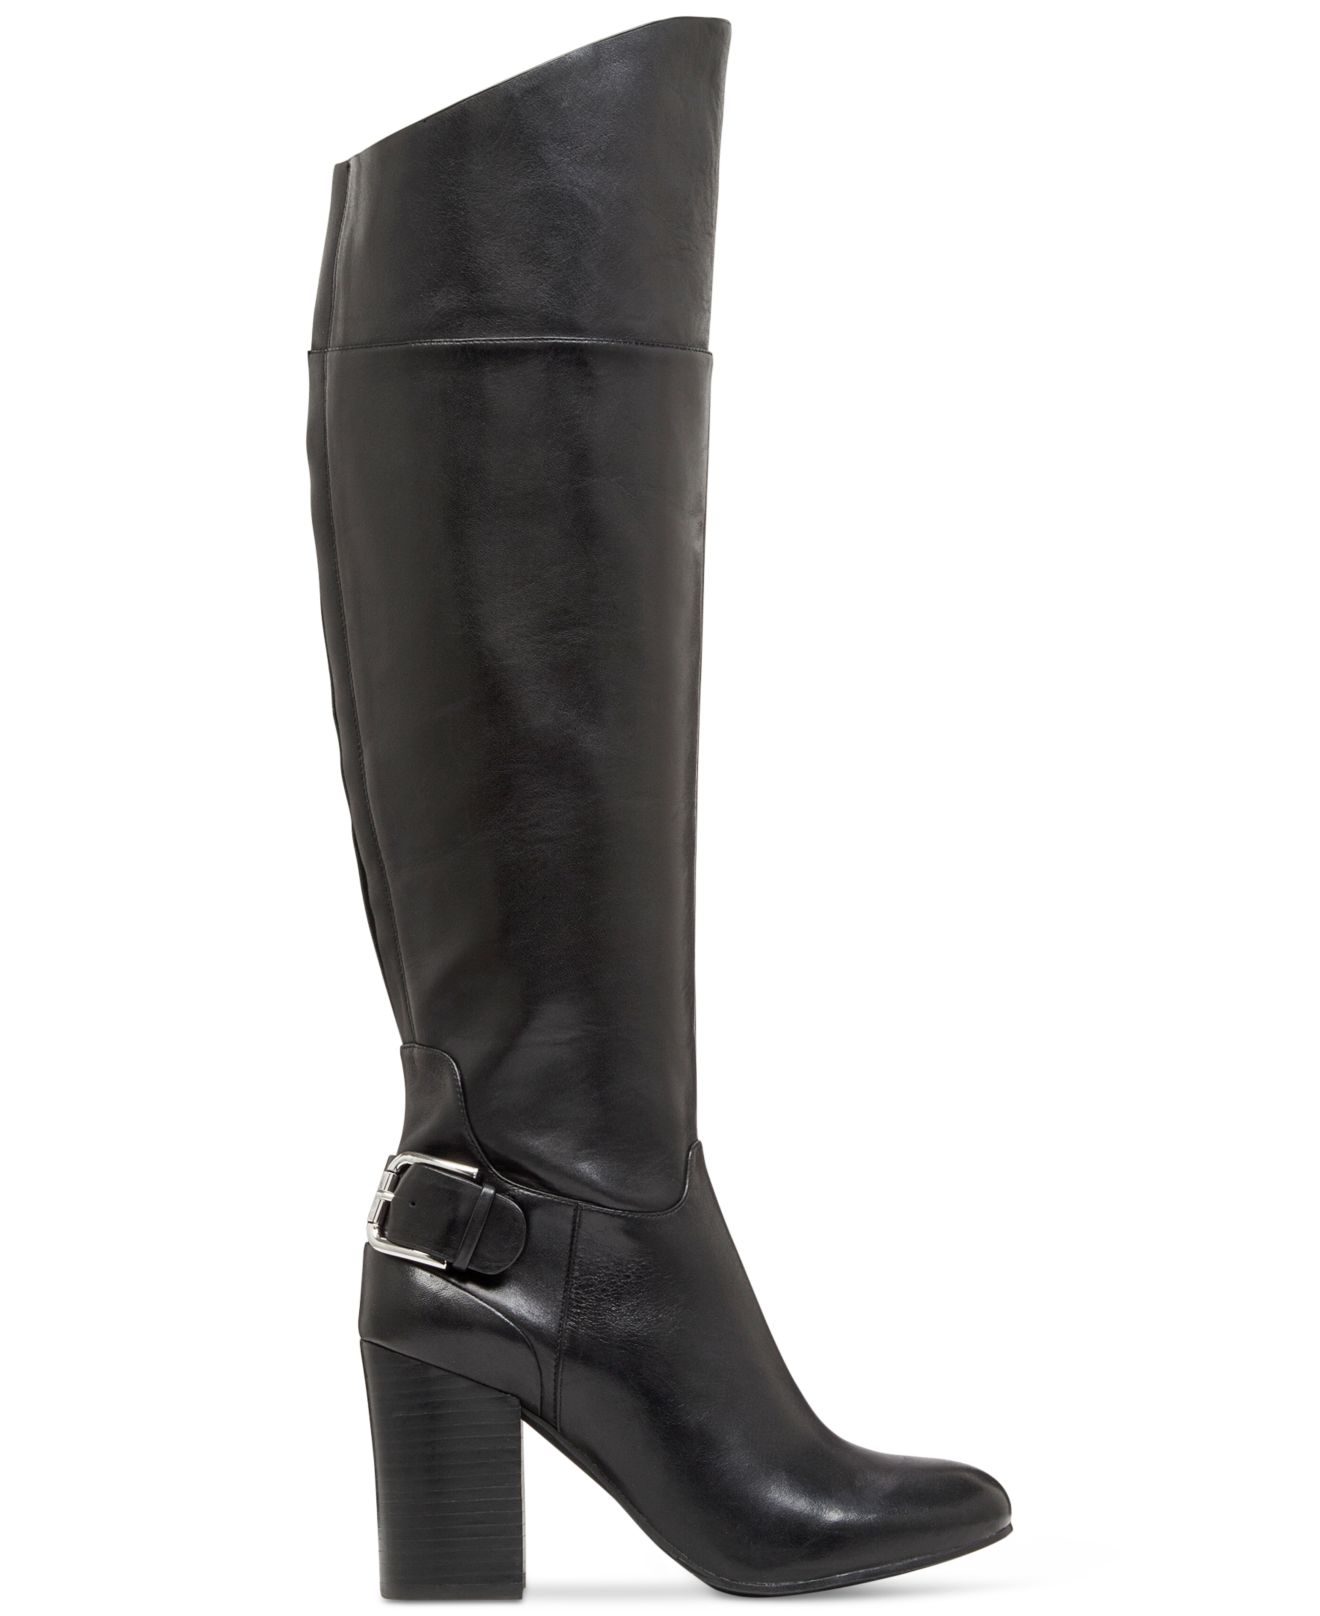 Vince camuto Sidney Tall Boots in Black | Lyst